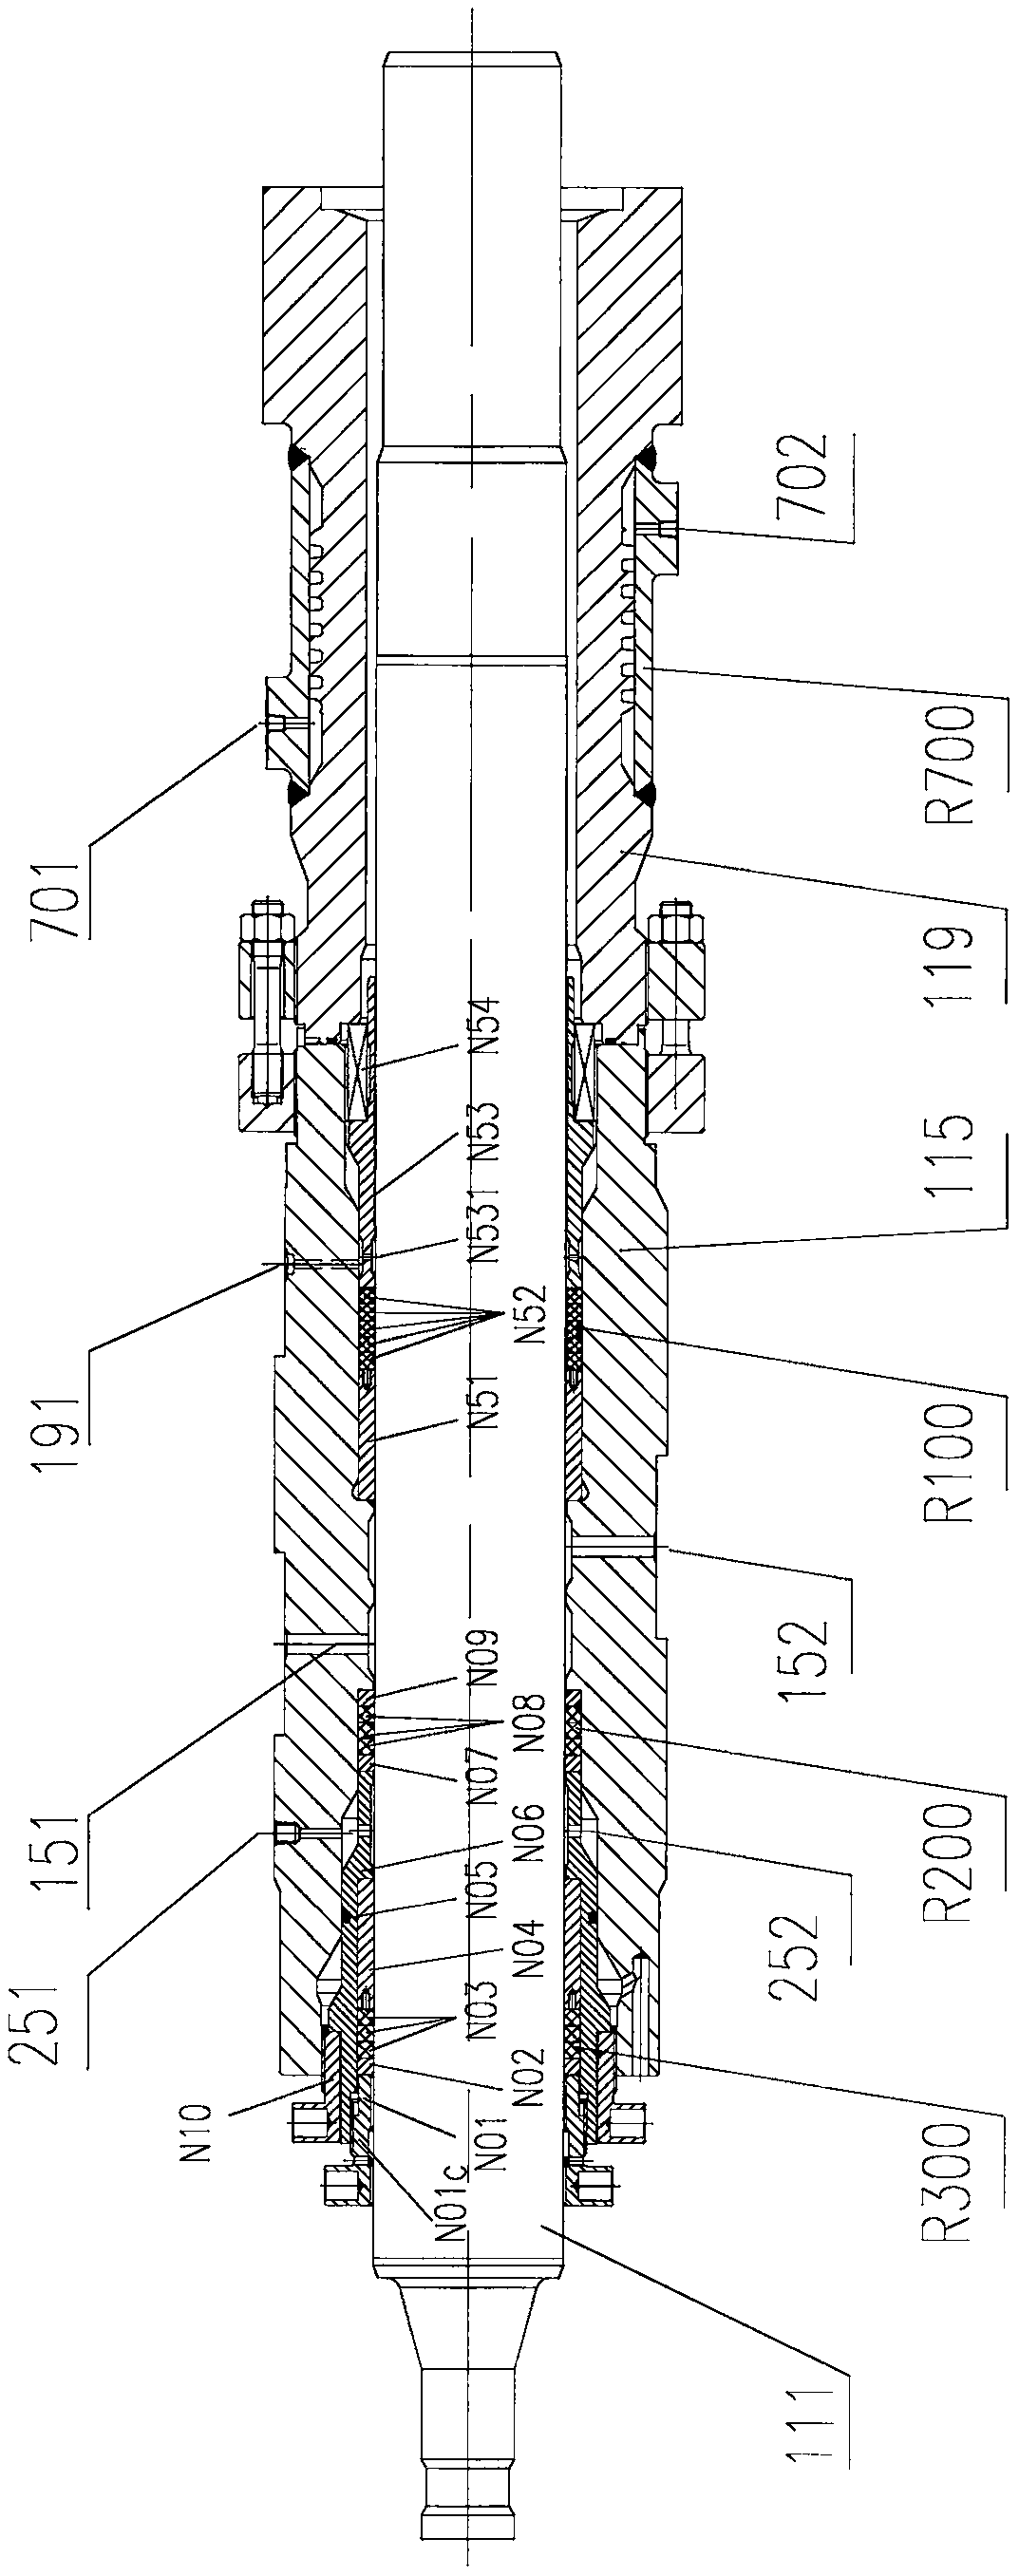 Three-filler type reciprocating seal using pressurizing middle flushing cavity and reciprocating pump thereof